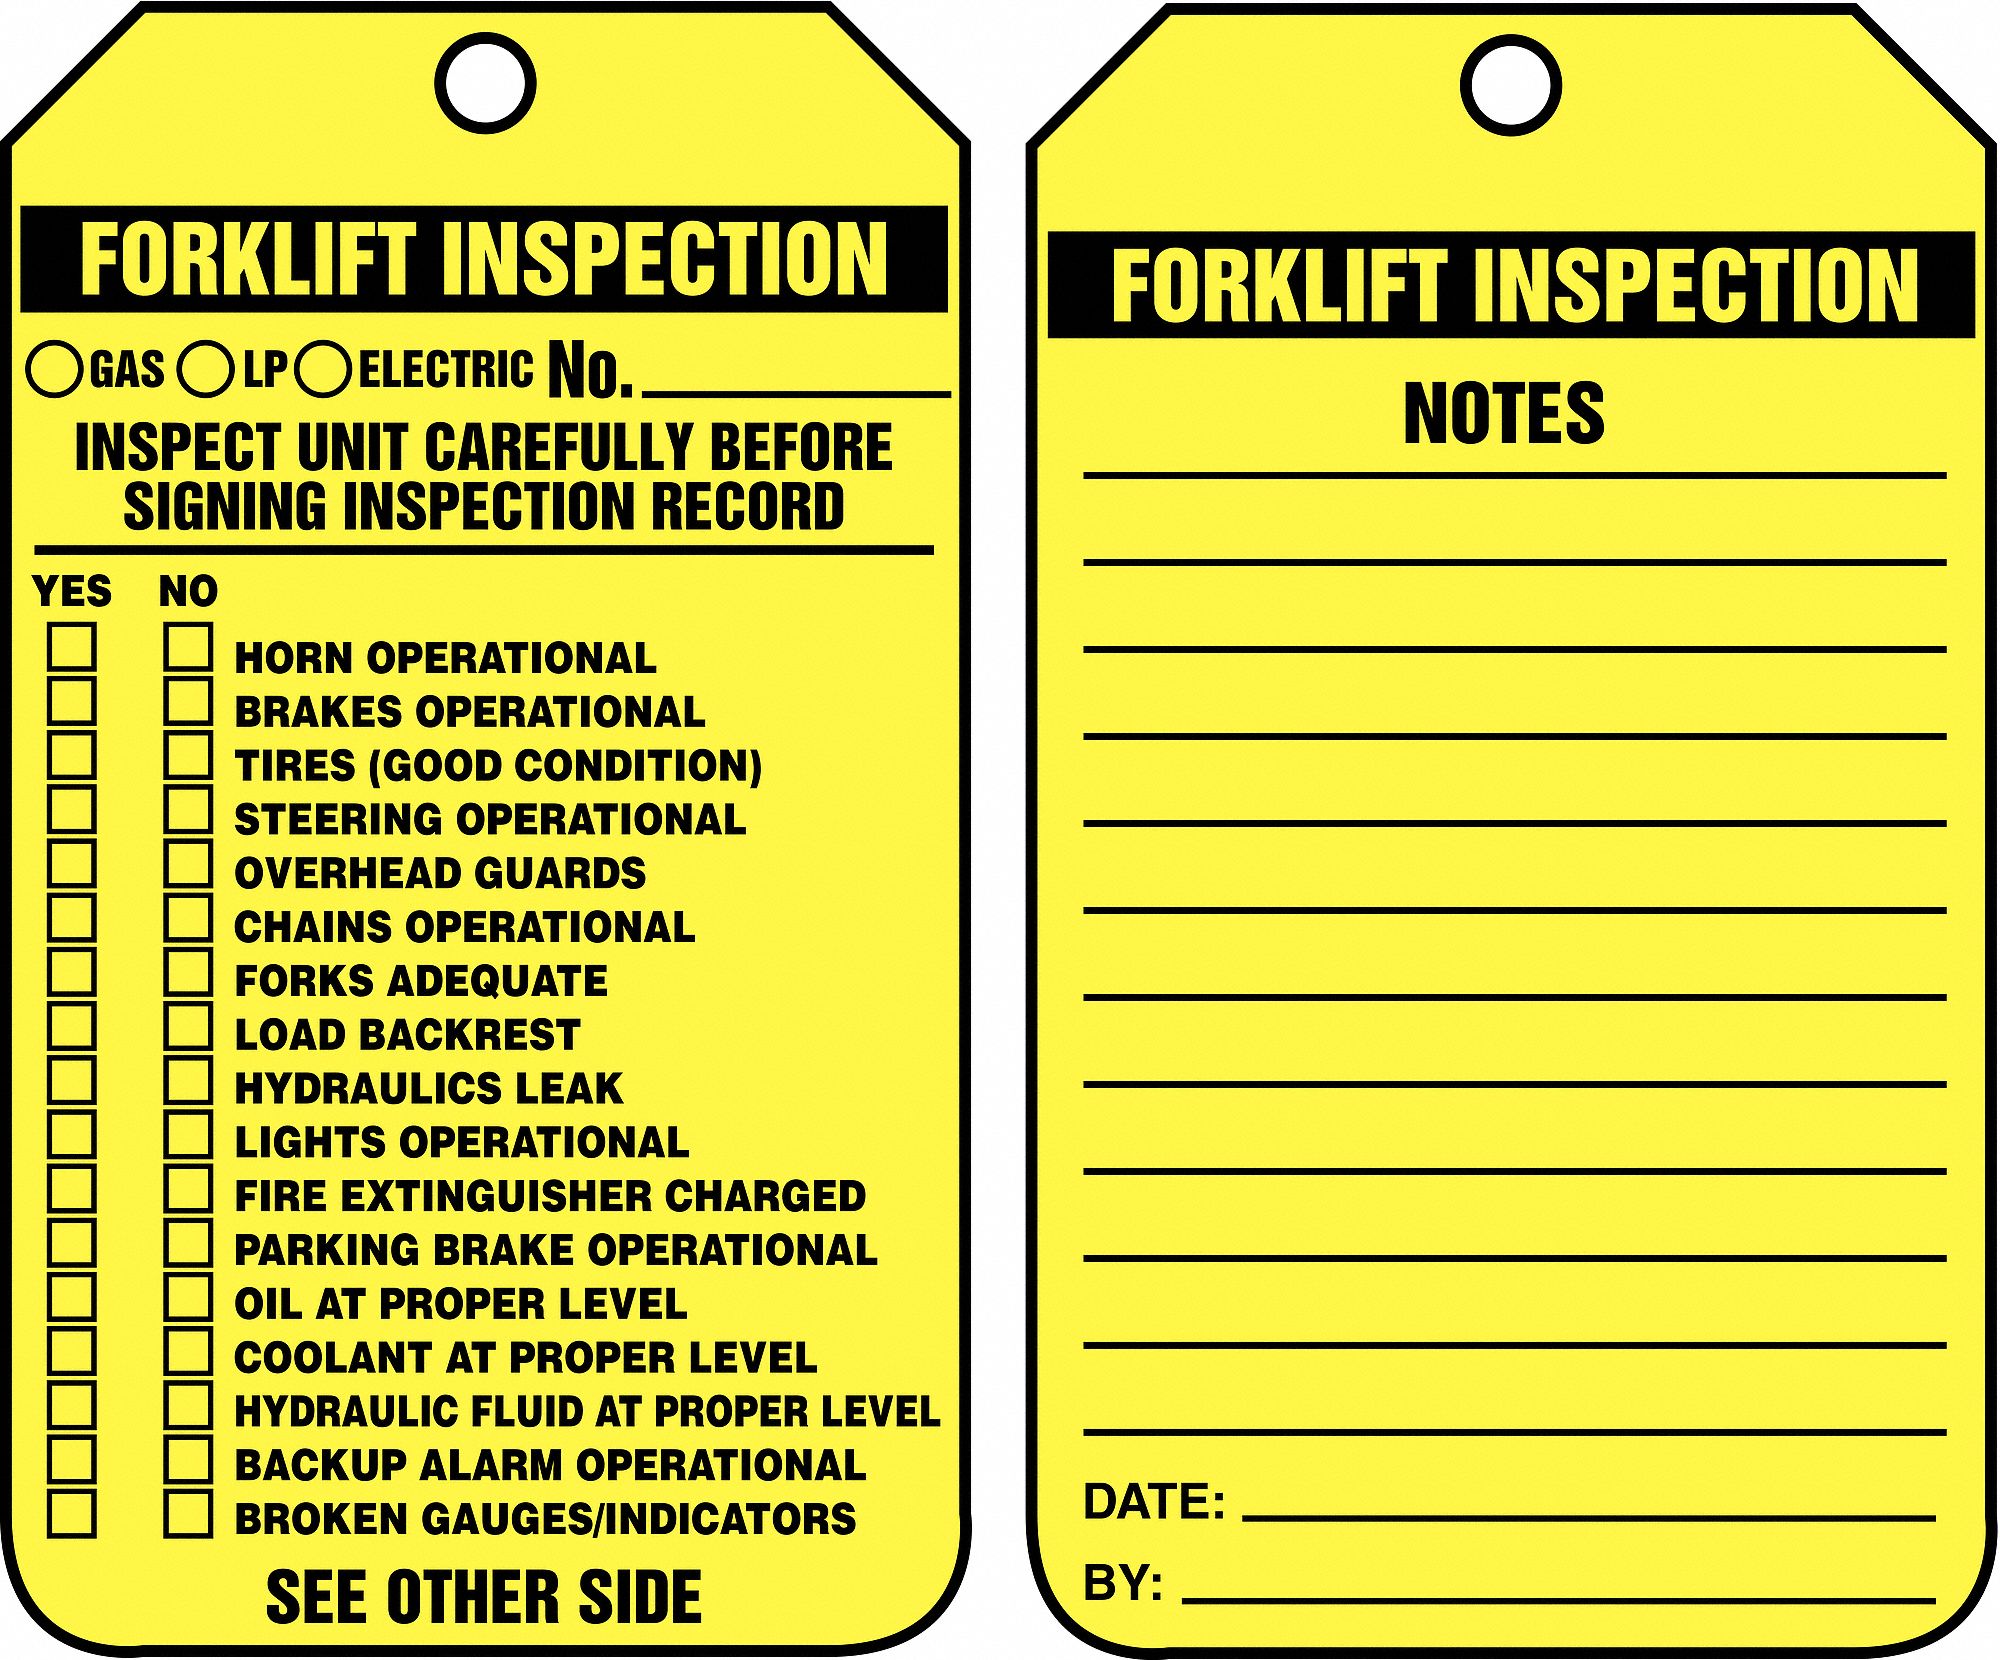 Inspection Tag,5-7/8 x 3-3/8,PK25